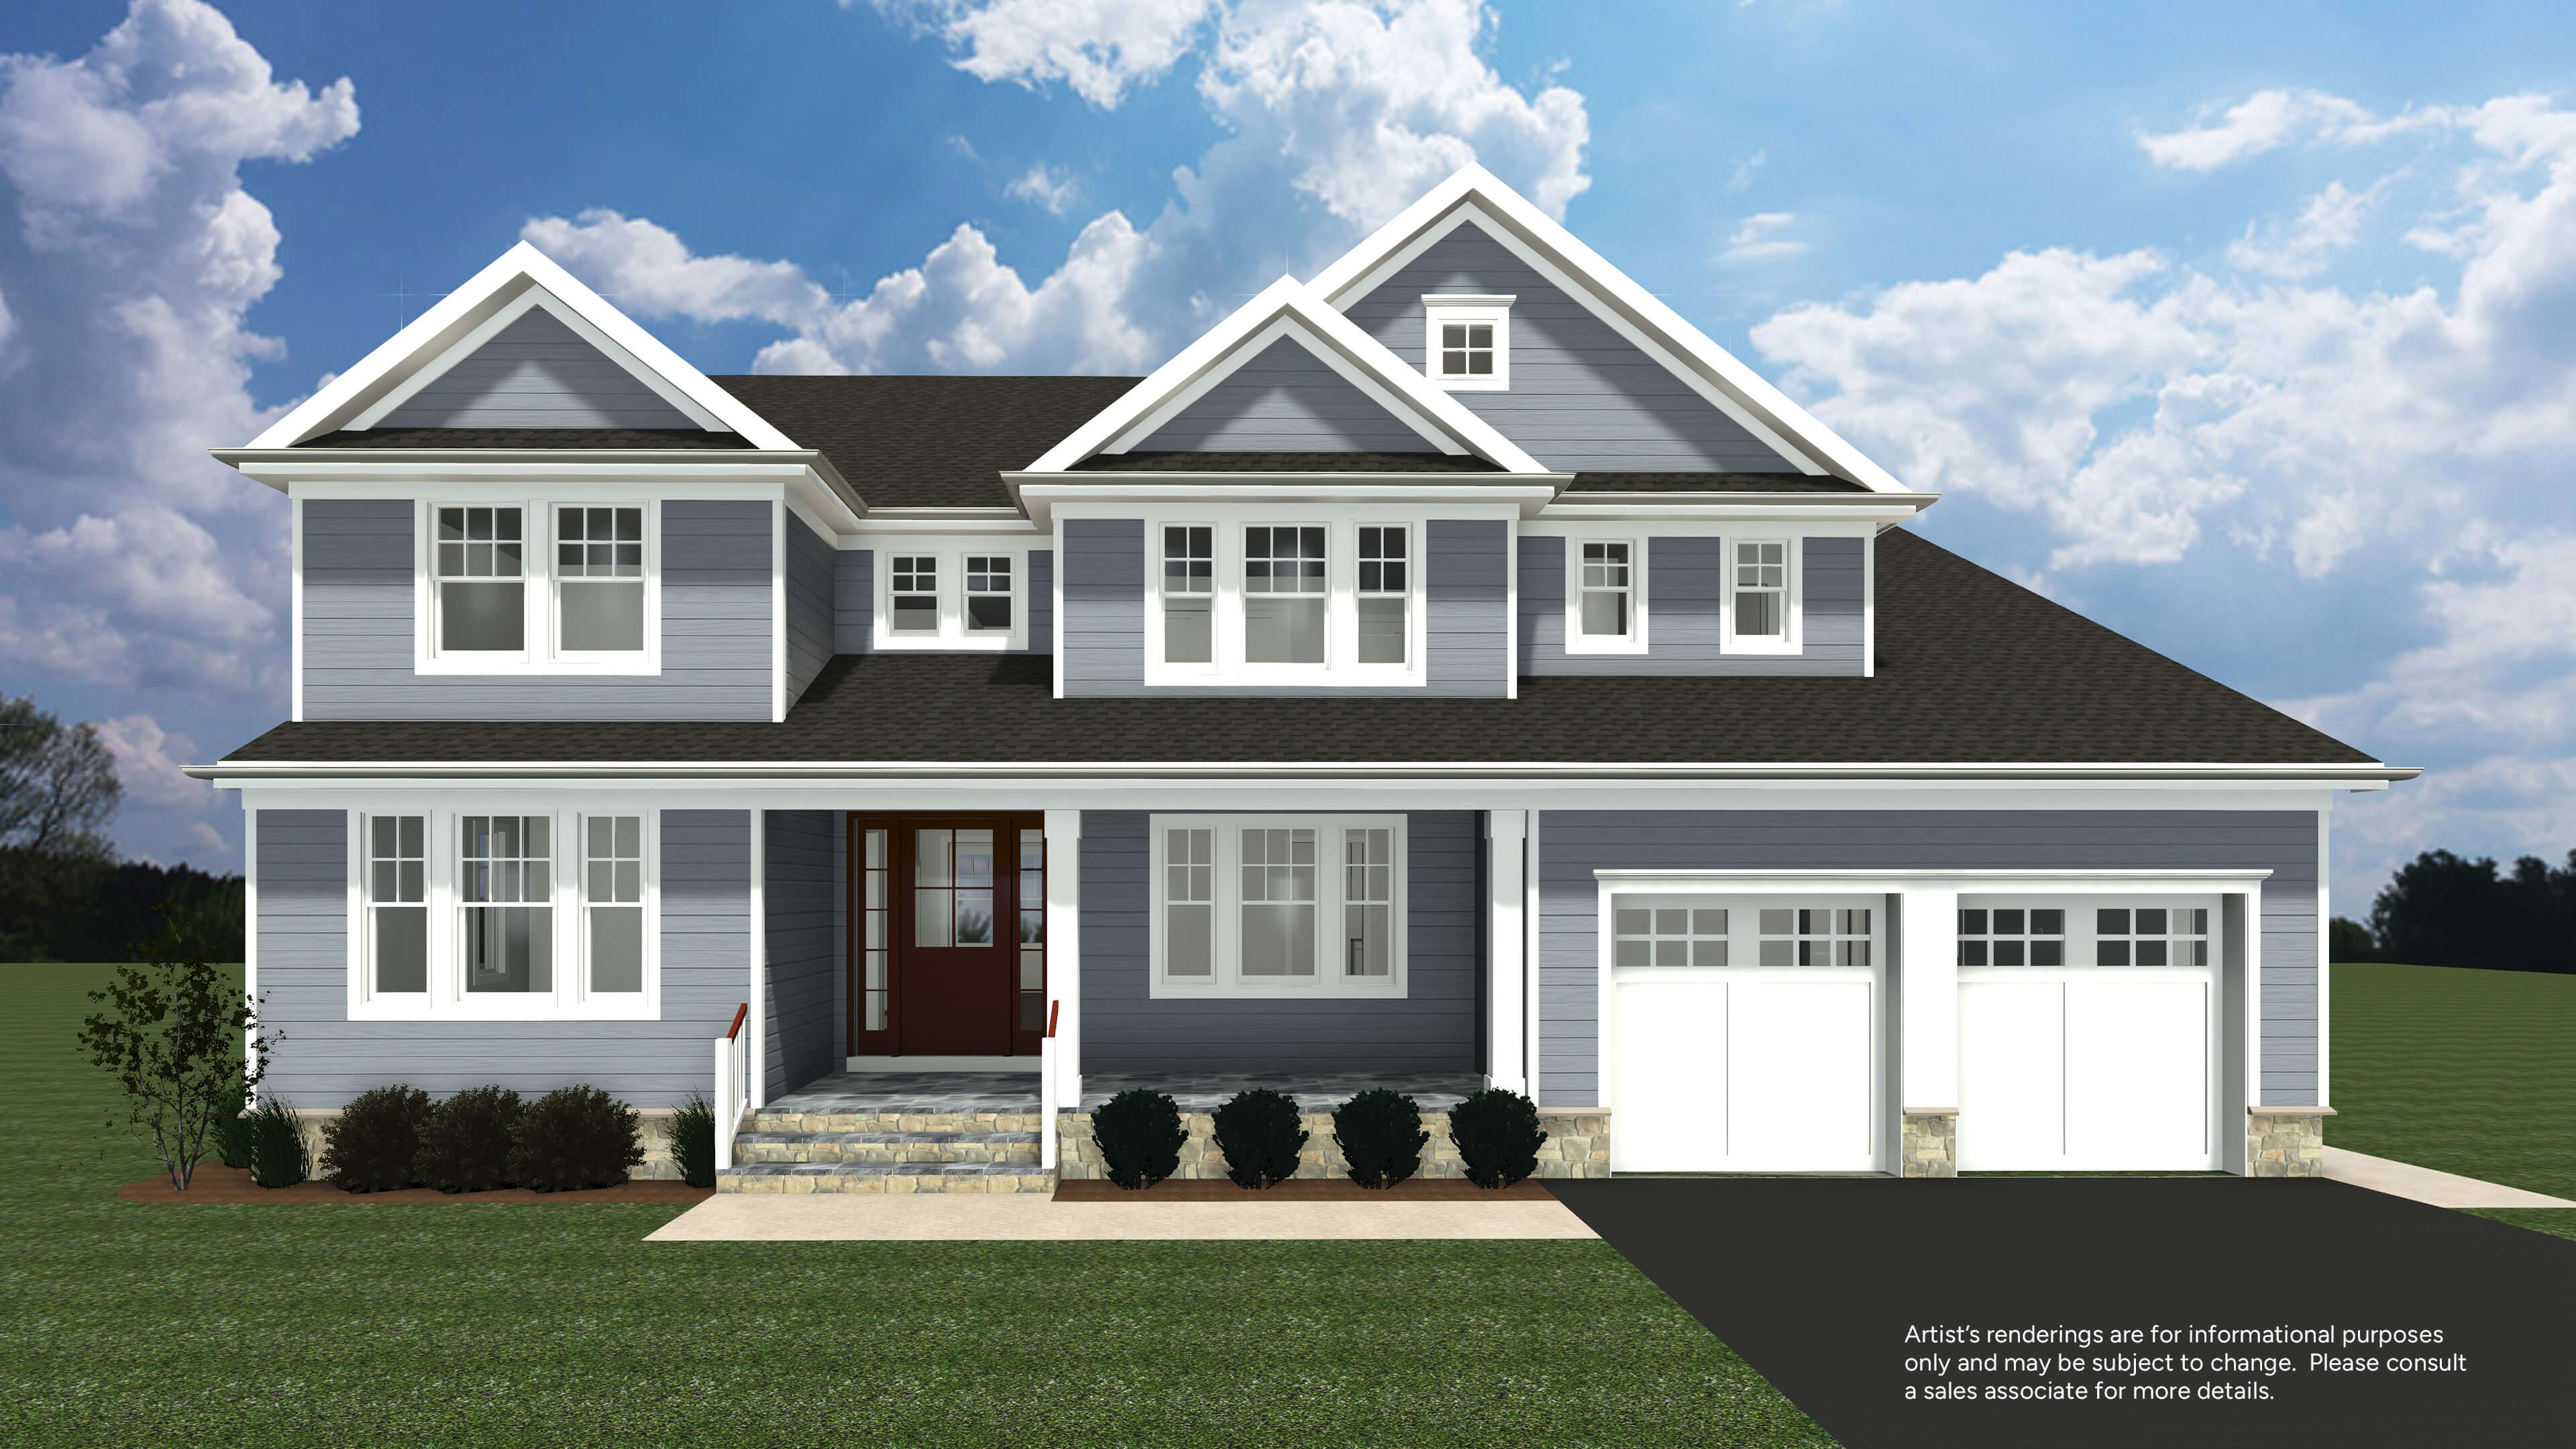 A Collection of New Homes in Brielle rendering